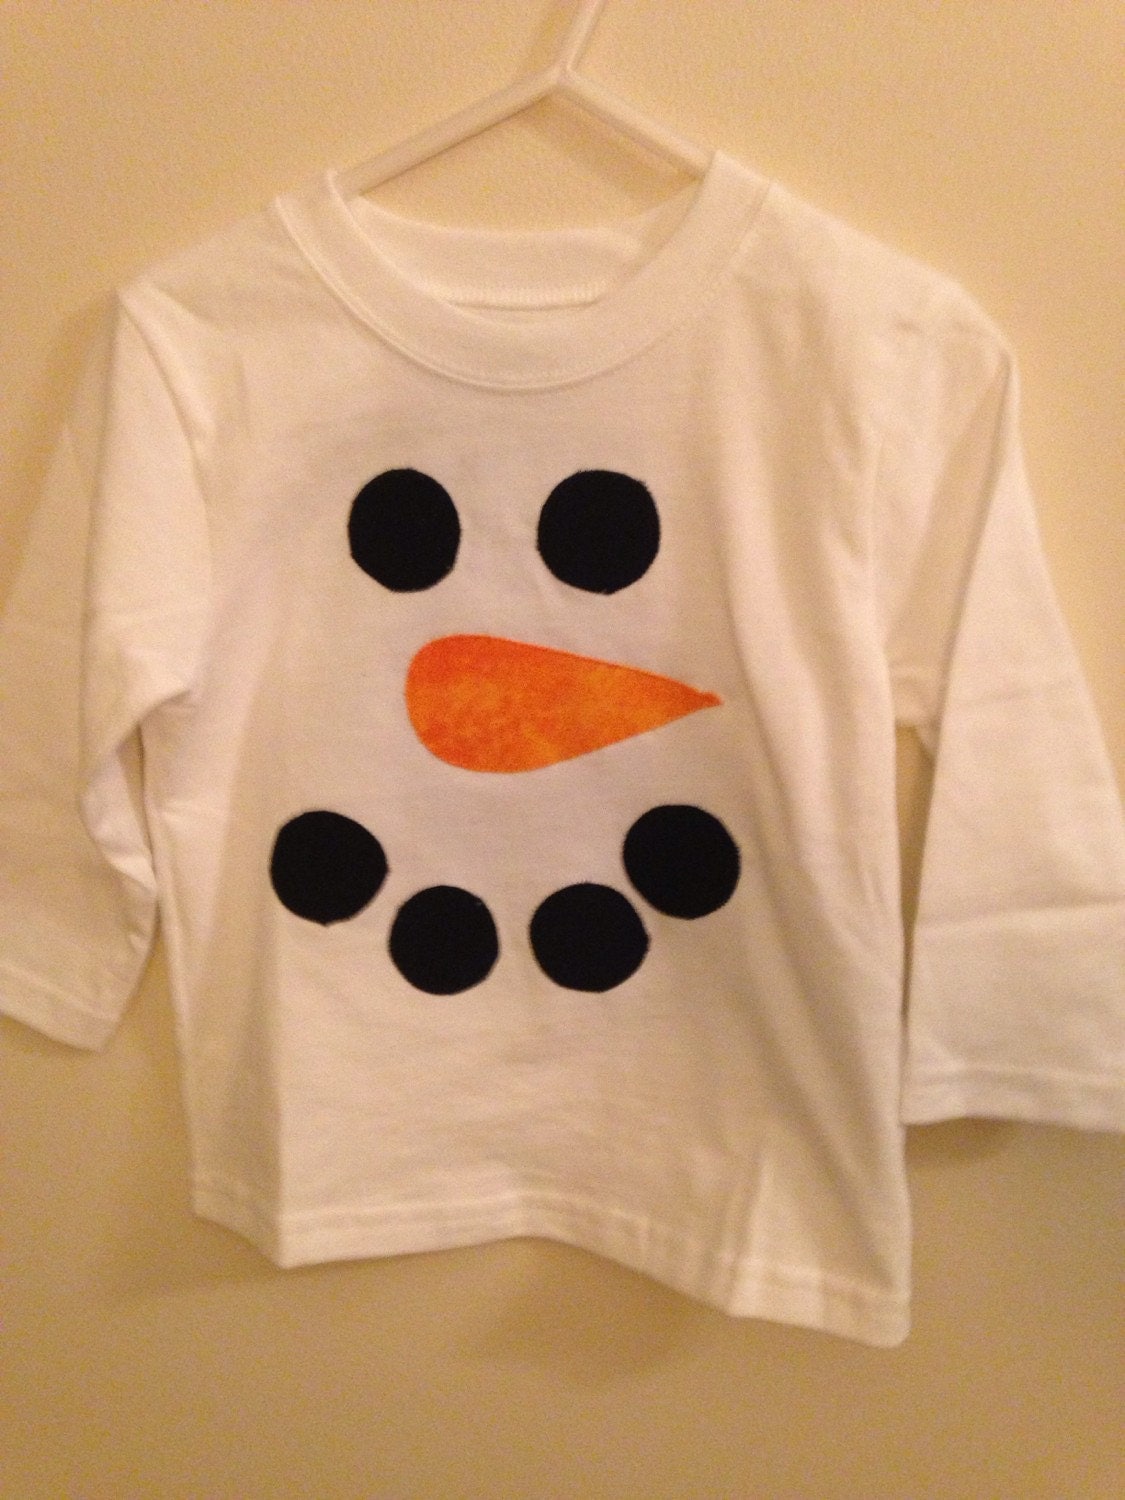 Boys Toddler White Snowman Shirt 12 month 18 month by ChubbyFeets